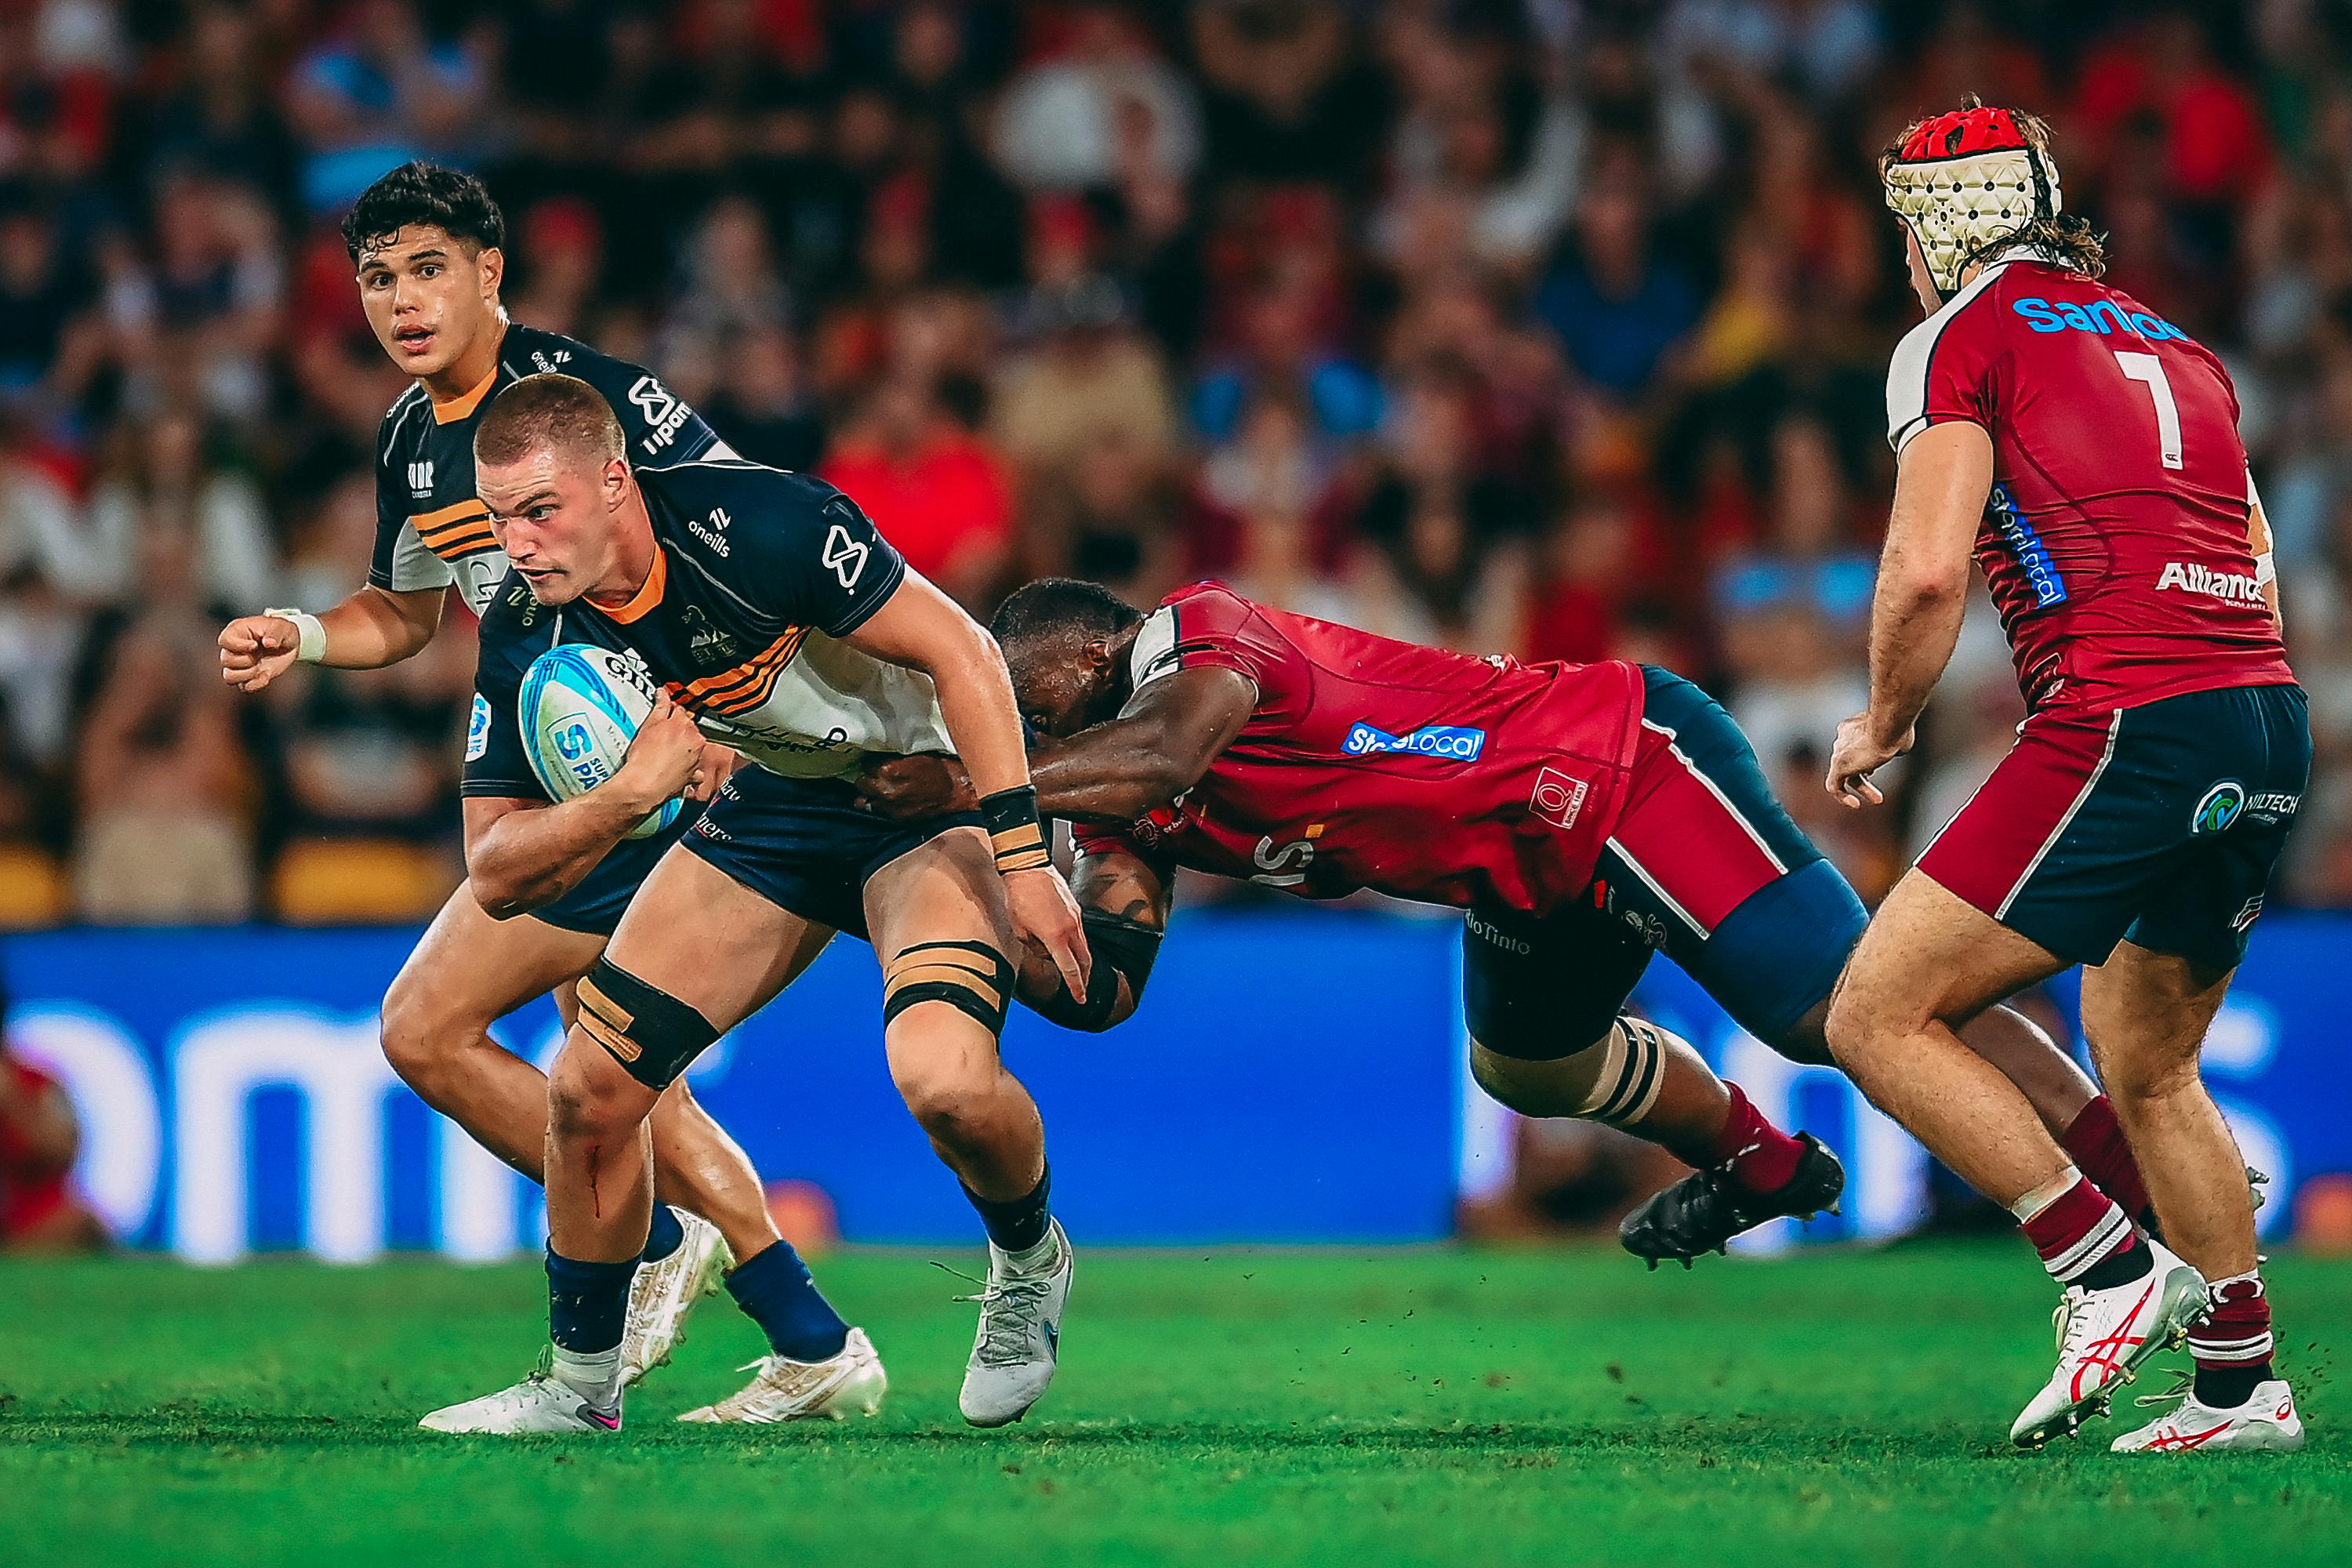 Charlie Cale in action against the Queensland Reds